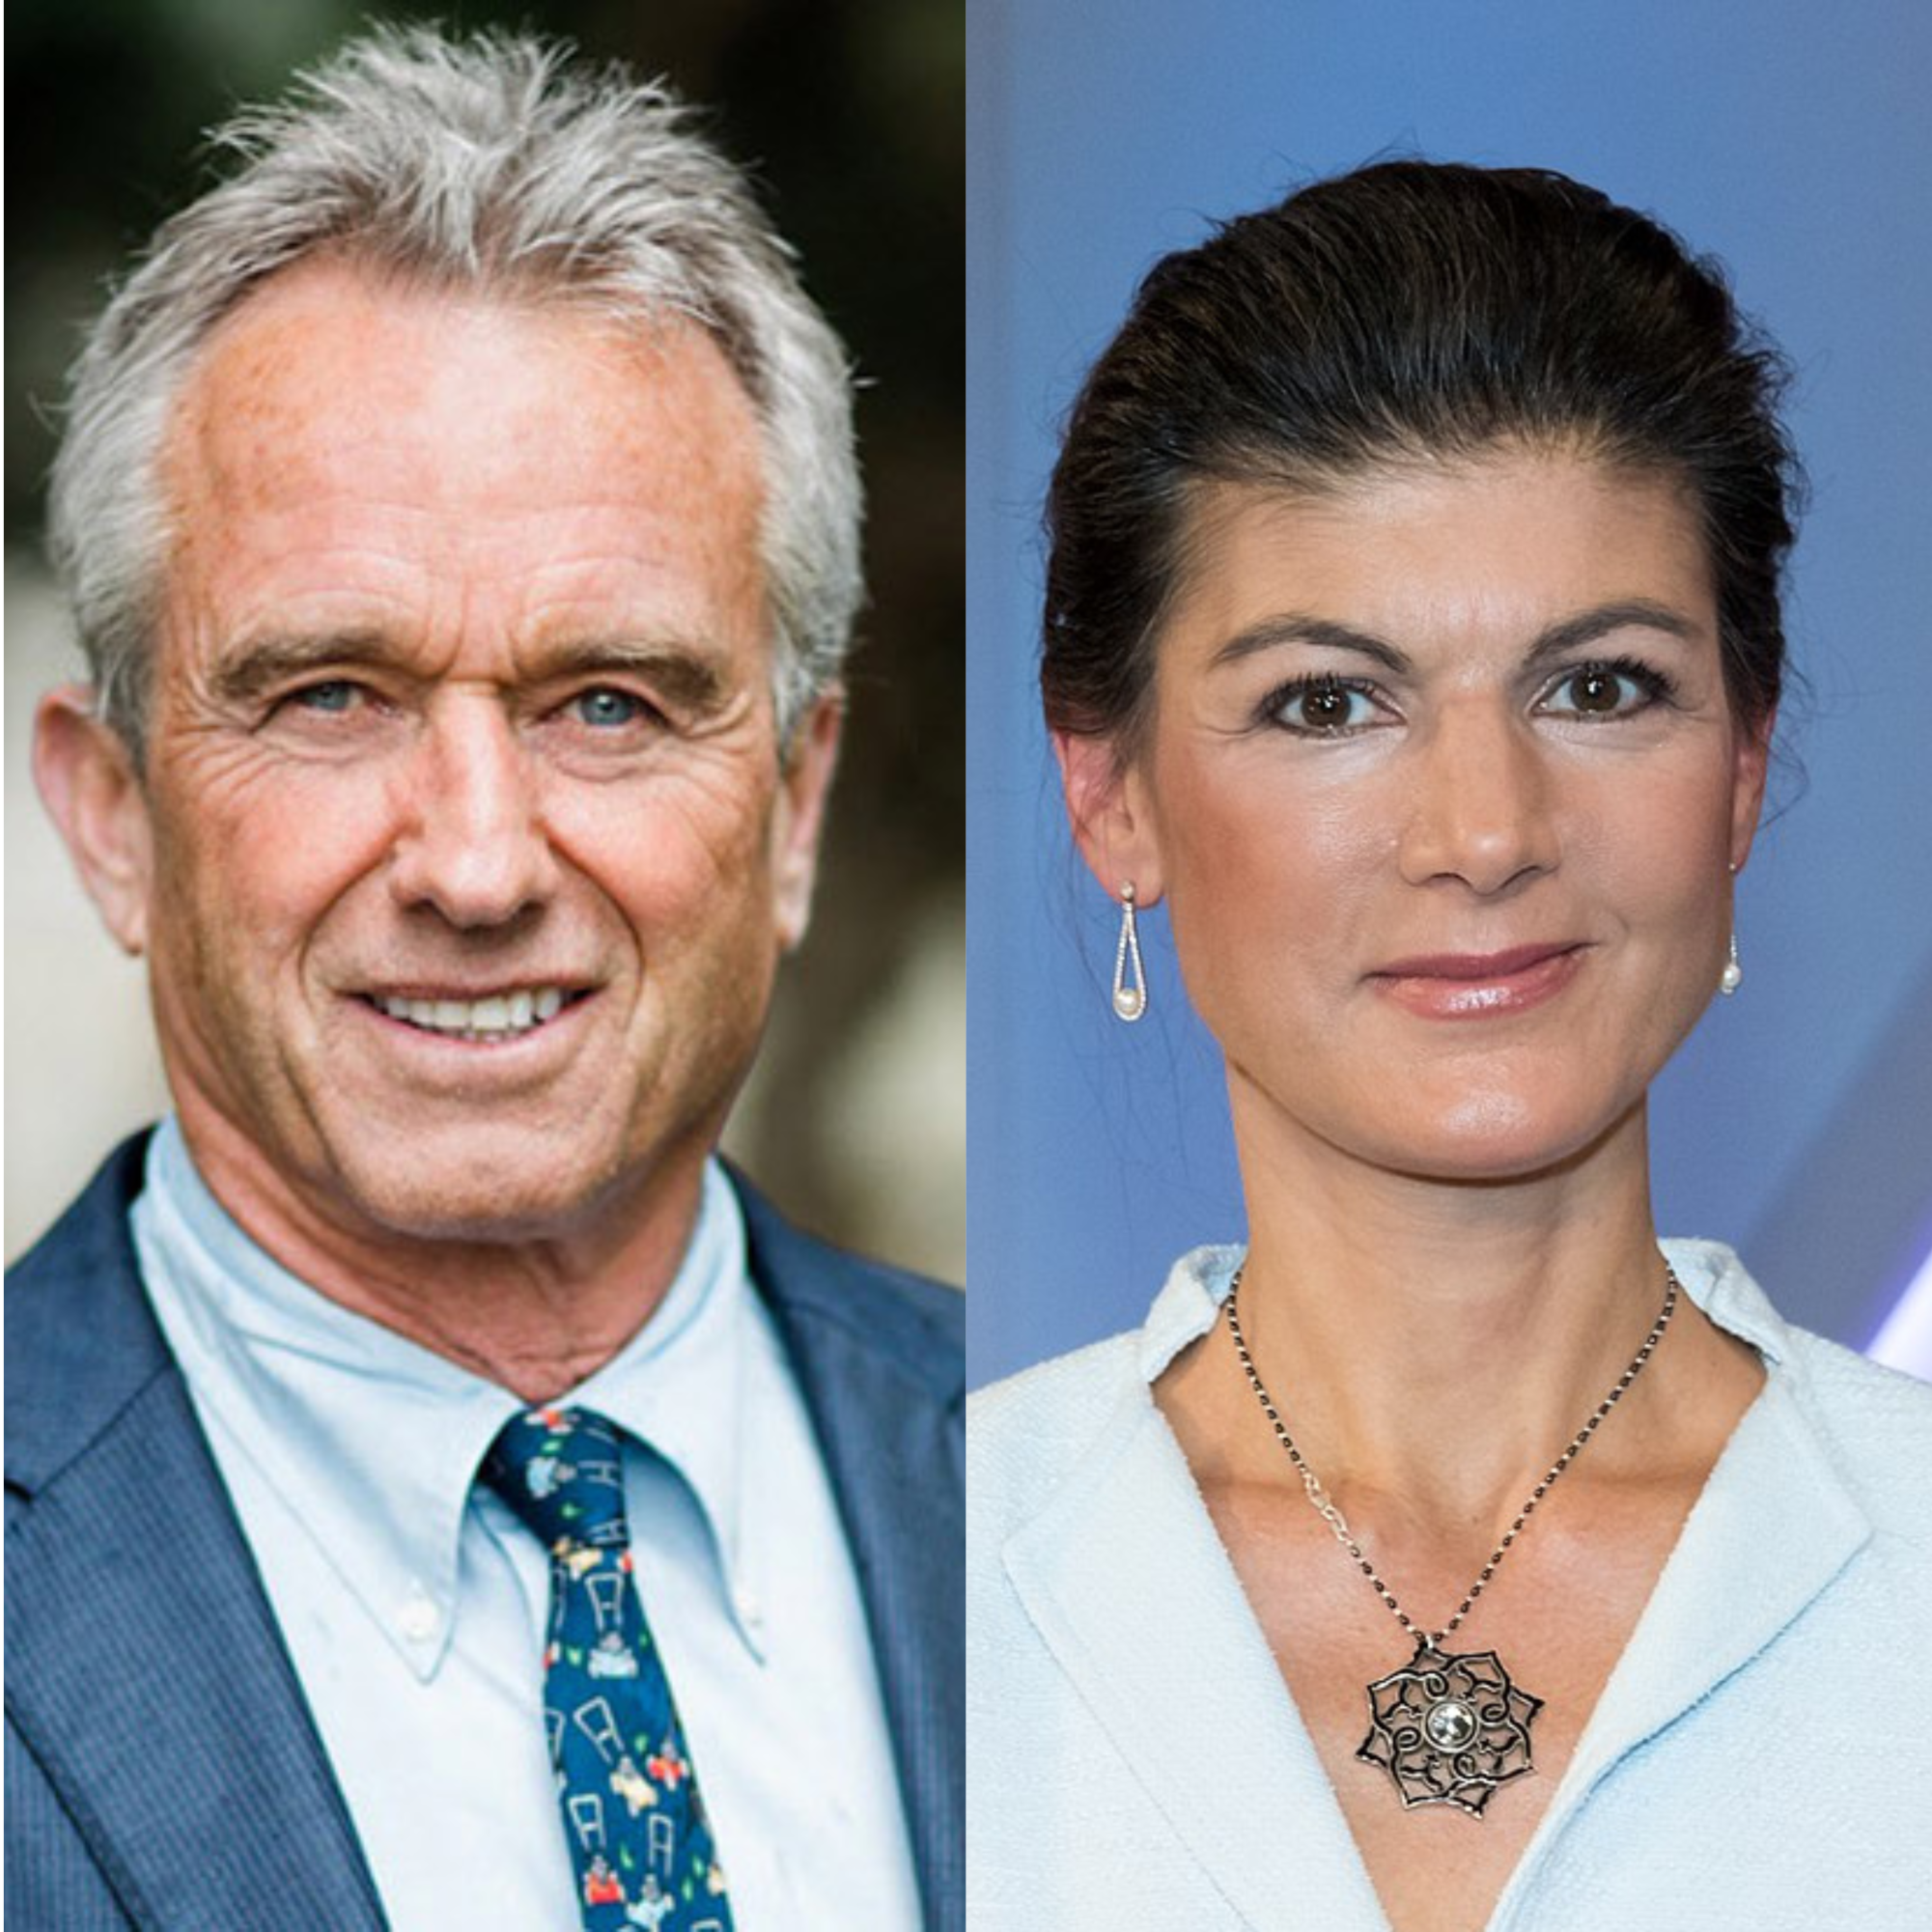 RFK JR and Sarah Wagenknecht. Graphic made by Noah Demo